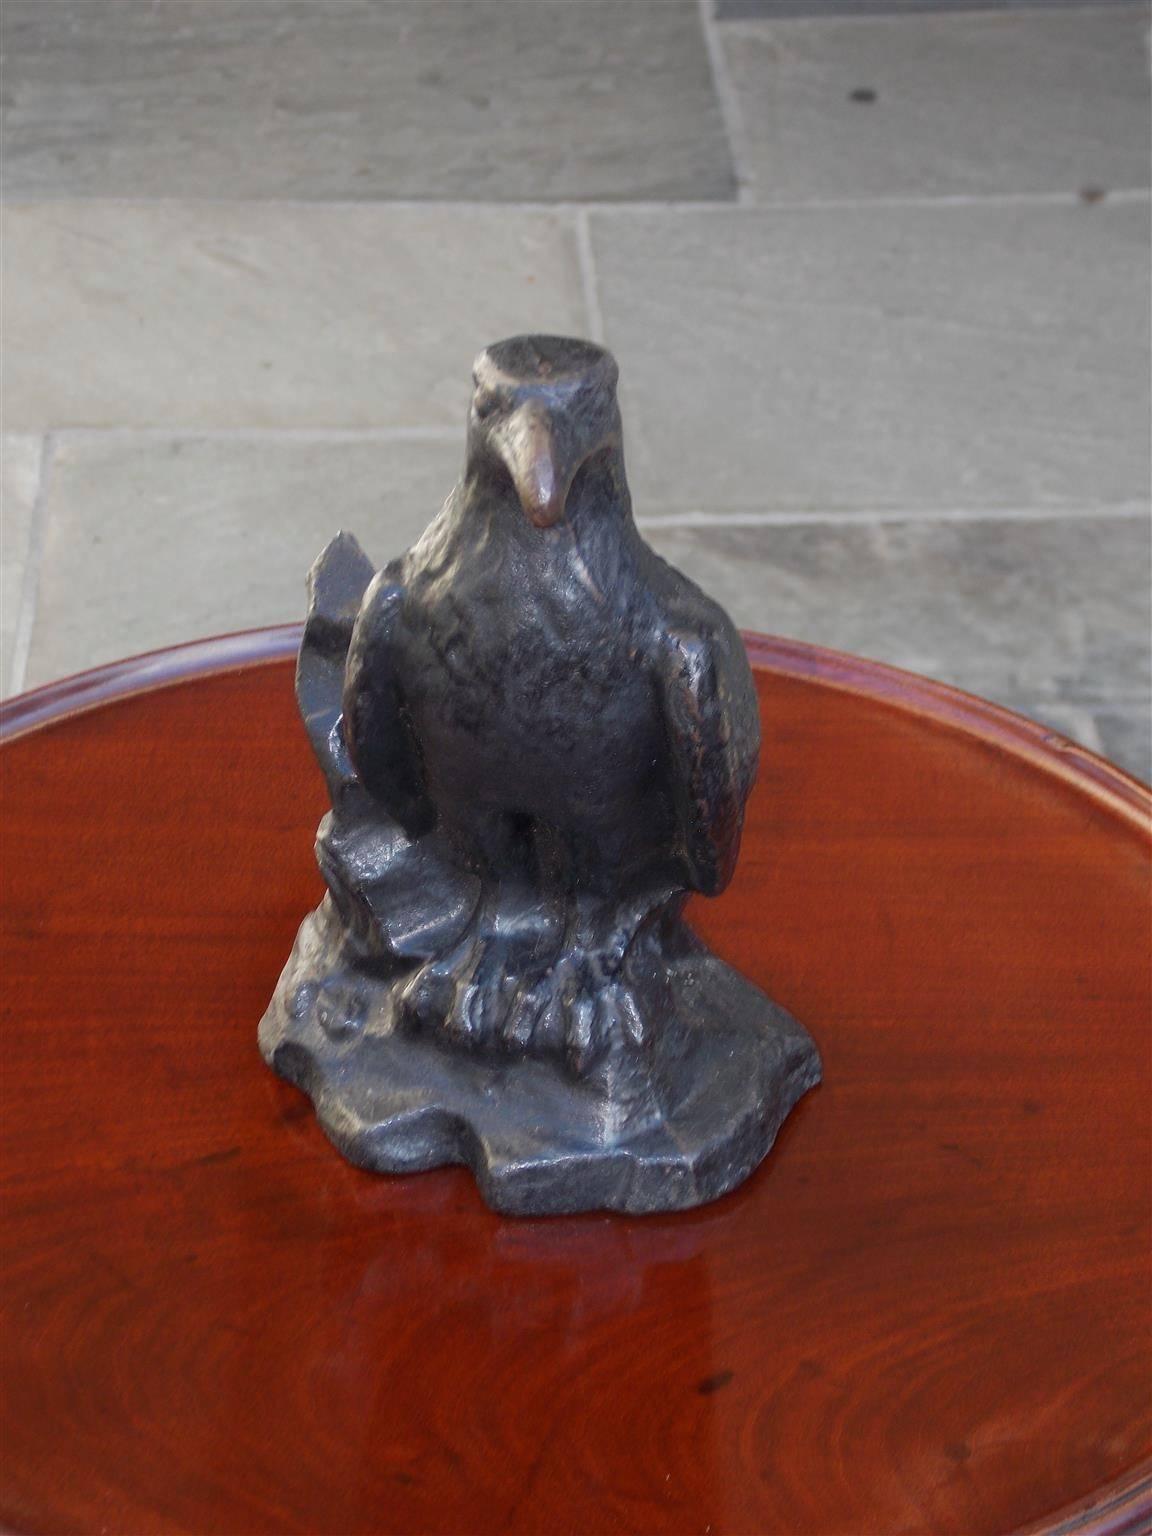 Scottish cast iron and hand-painted raven doorstop standing on rocky plinth base with centered incised space for holding door, Late 19th century.  